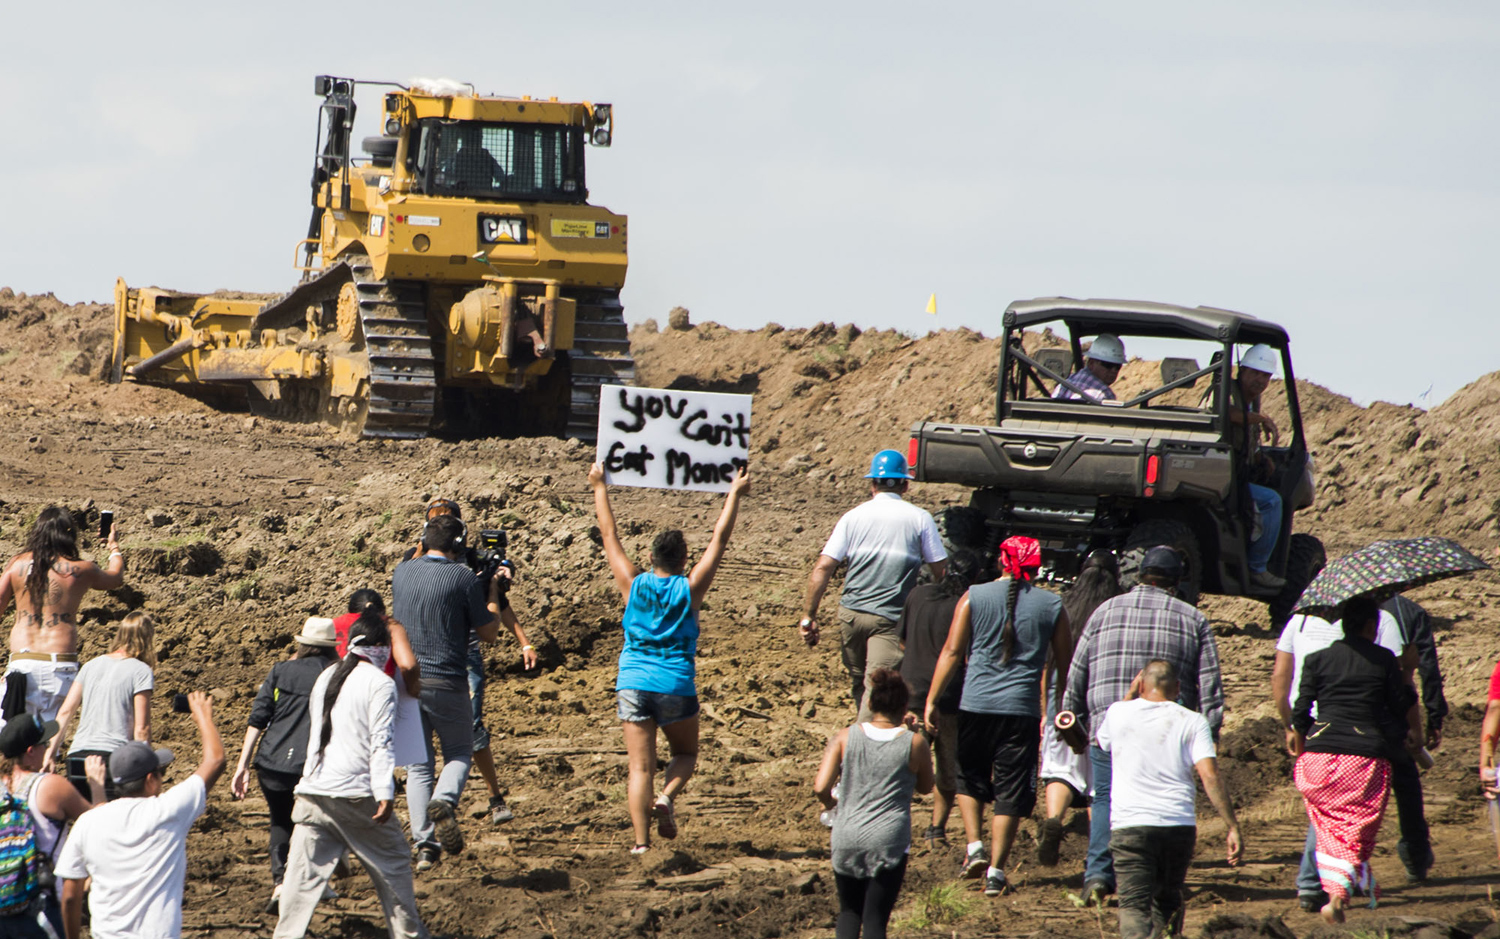 Native American protestors and their supporters are confronted by security during a demonstration against work being done for the Dakota Access Pipeline (DAPL) oil pipeline, near Cannon Ball, North Dakota, September 3, 2016. Hundreds of Native American protestors and their supporters, who fear the Dakota Access Pipeline will polluted their water, forced construction workers and security forces to retreat and work to stop. / AFP / Robyn BECK        (Photo credit should read ROBYN BECK/AFP/Getty Images)